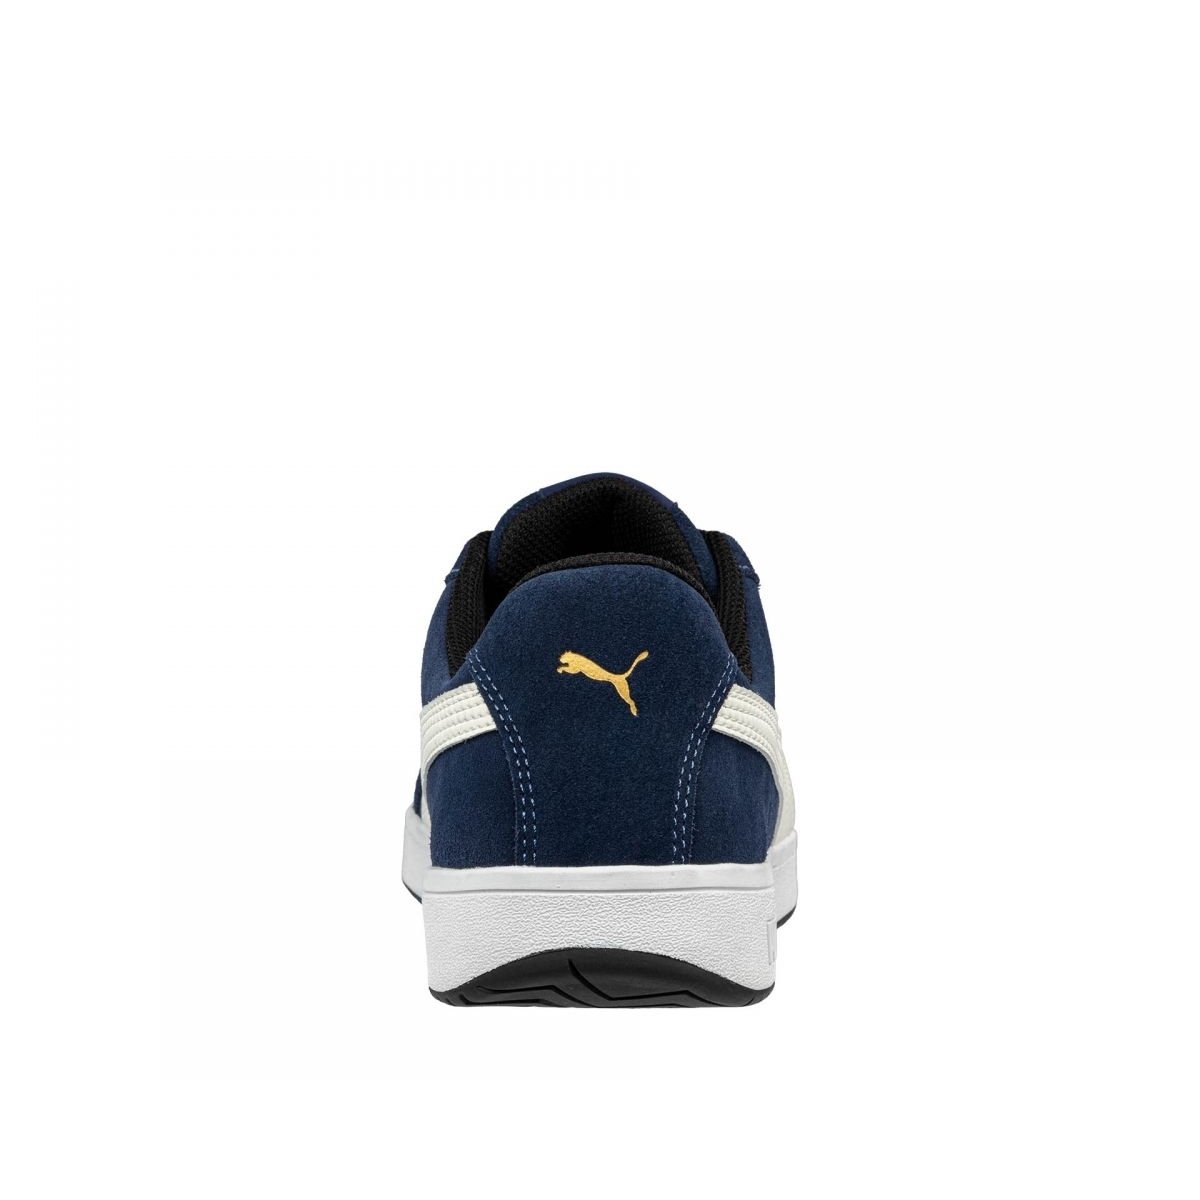 PUMA Safety Men's Iconic Low Composite Toe EH Work Shoes Navy Suede - 640025 ONE SIZE Navy - Navy, 15